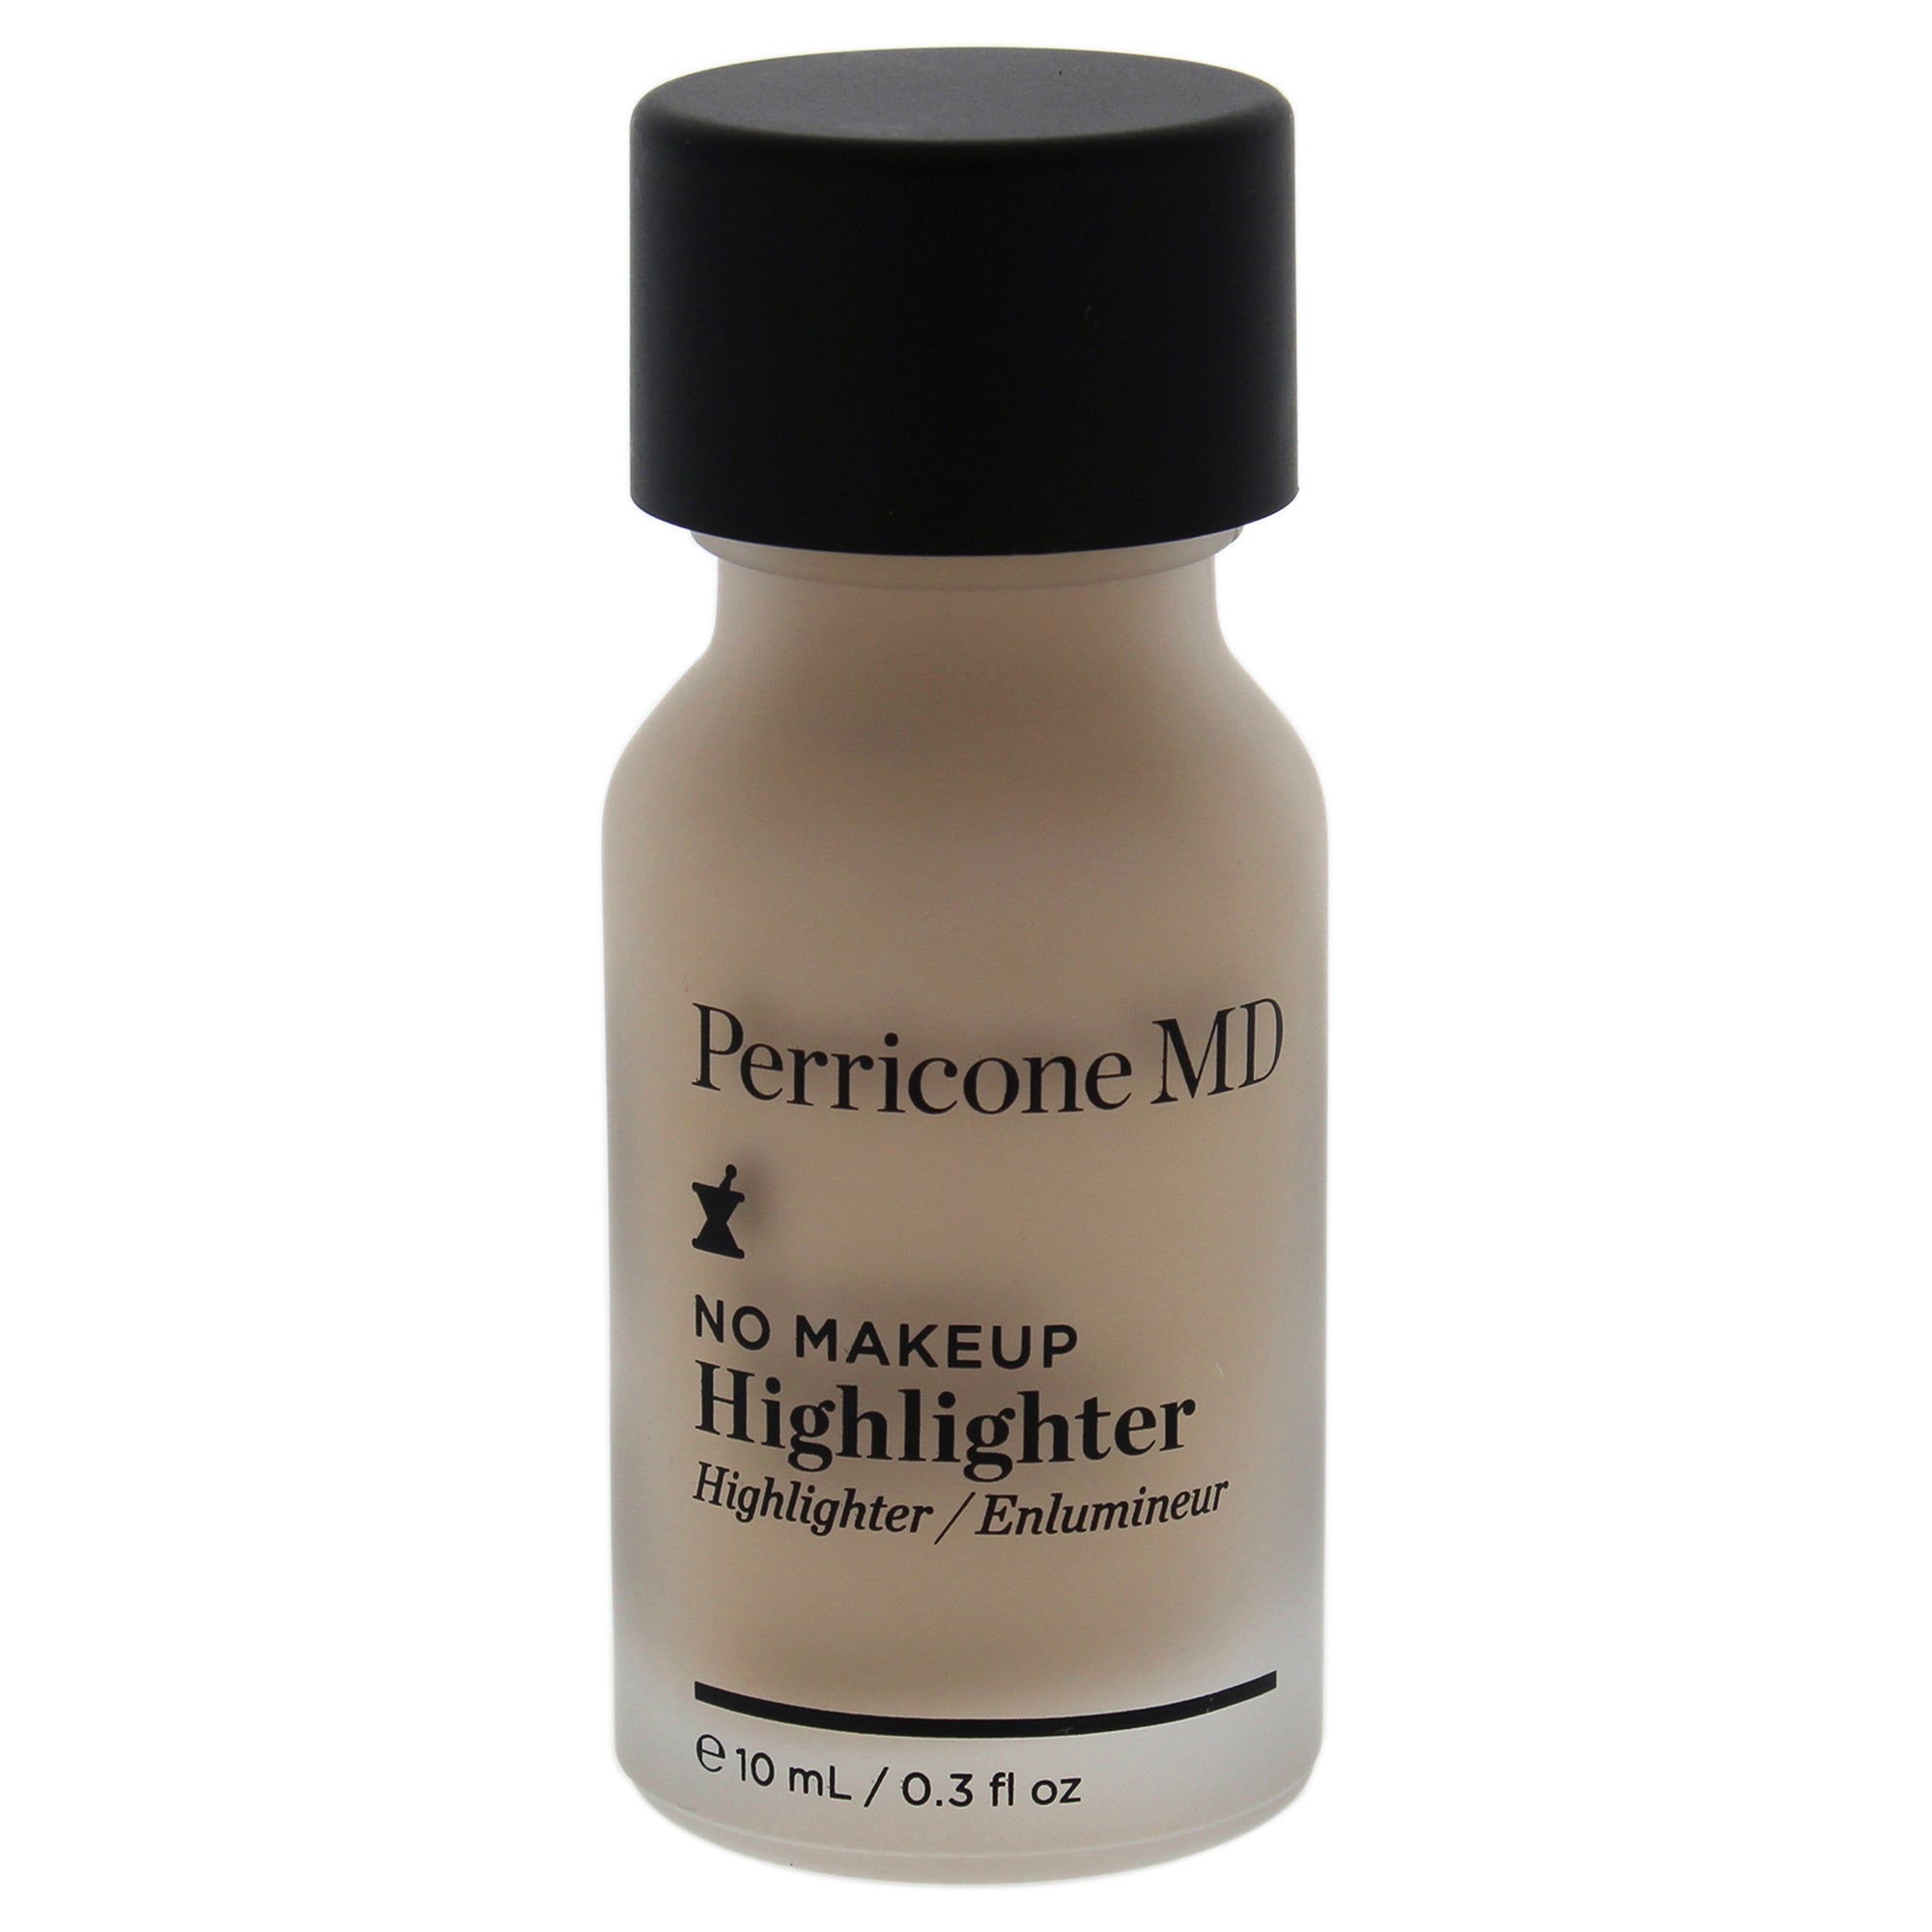 No Makeup Highlighter by Perricone MD for Unisex - 0.3 oz Highlighter